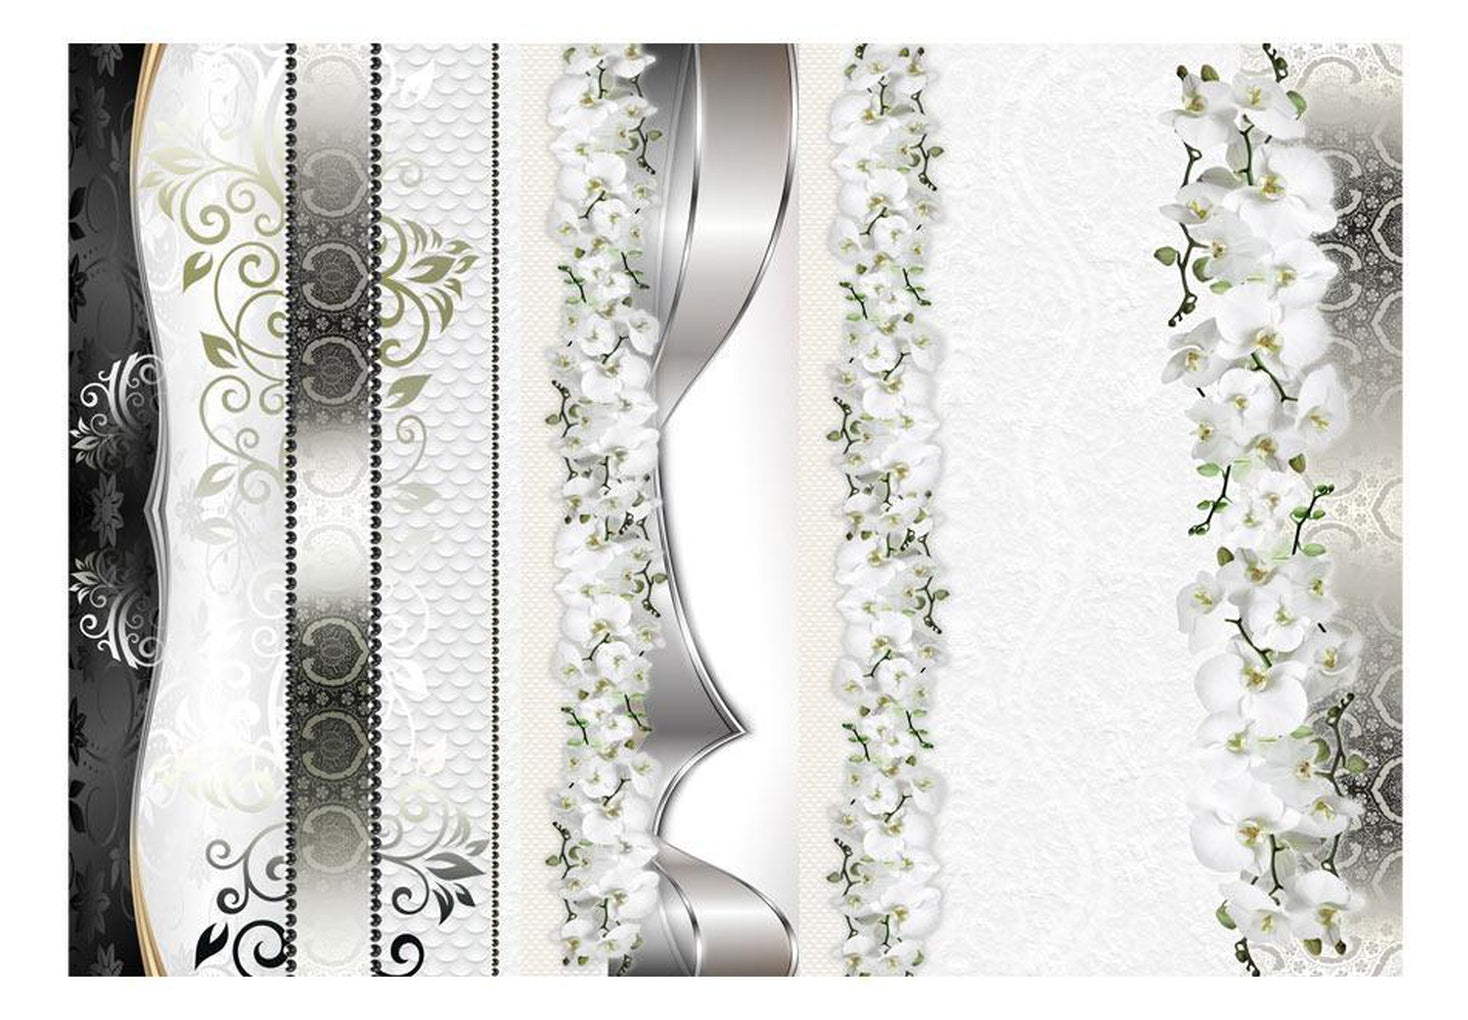 Wall mural - Parade of orchids in shades of gray-TipTopHomeDecor